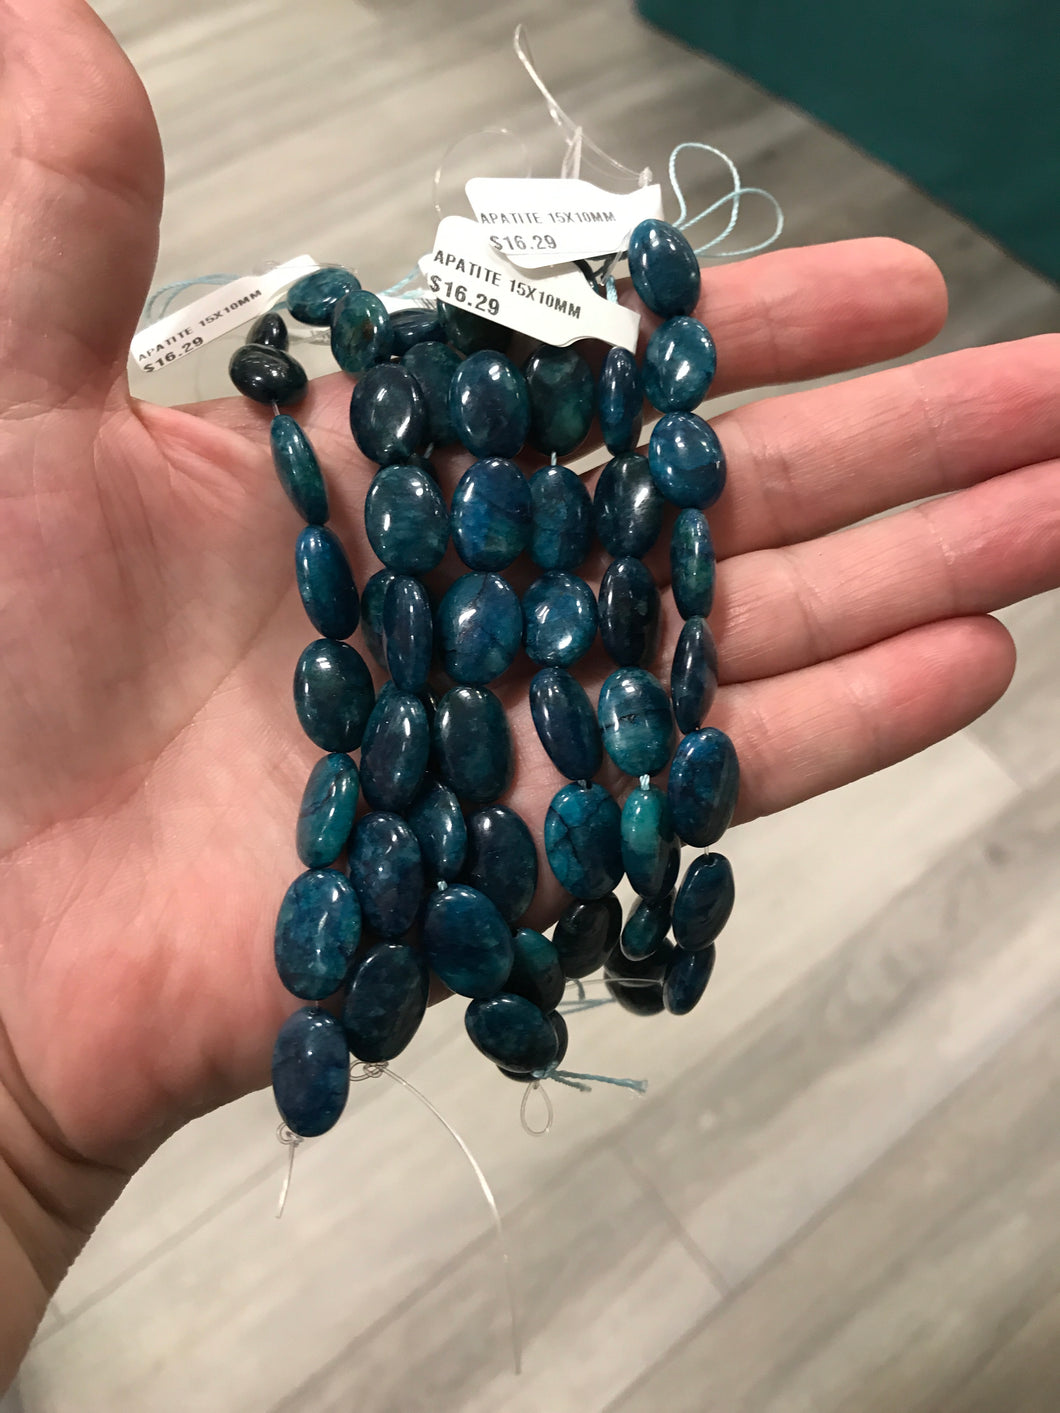 APATITE OVAL BEADS 15x10MM